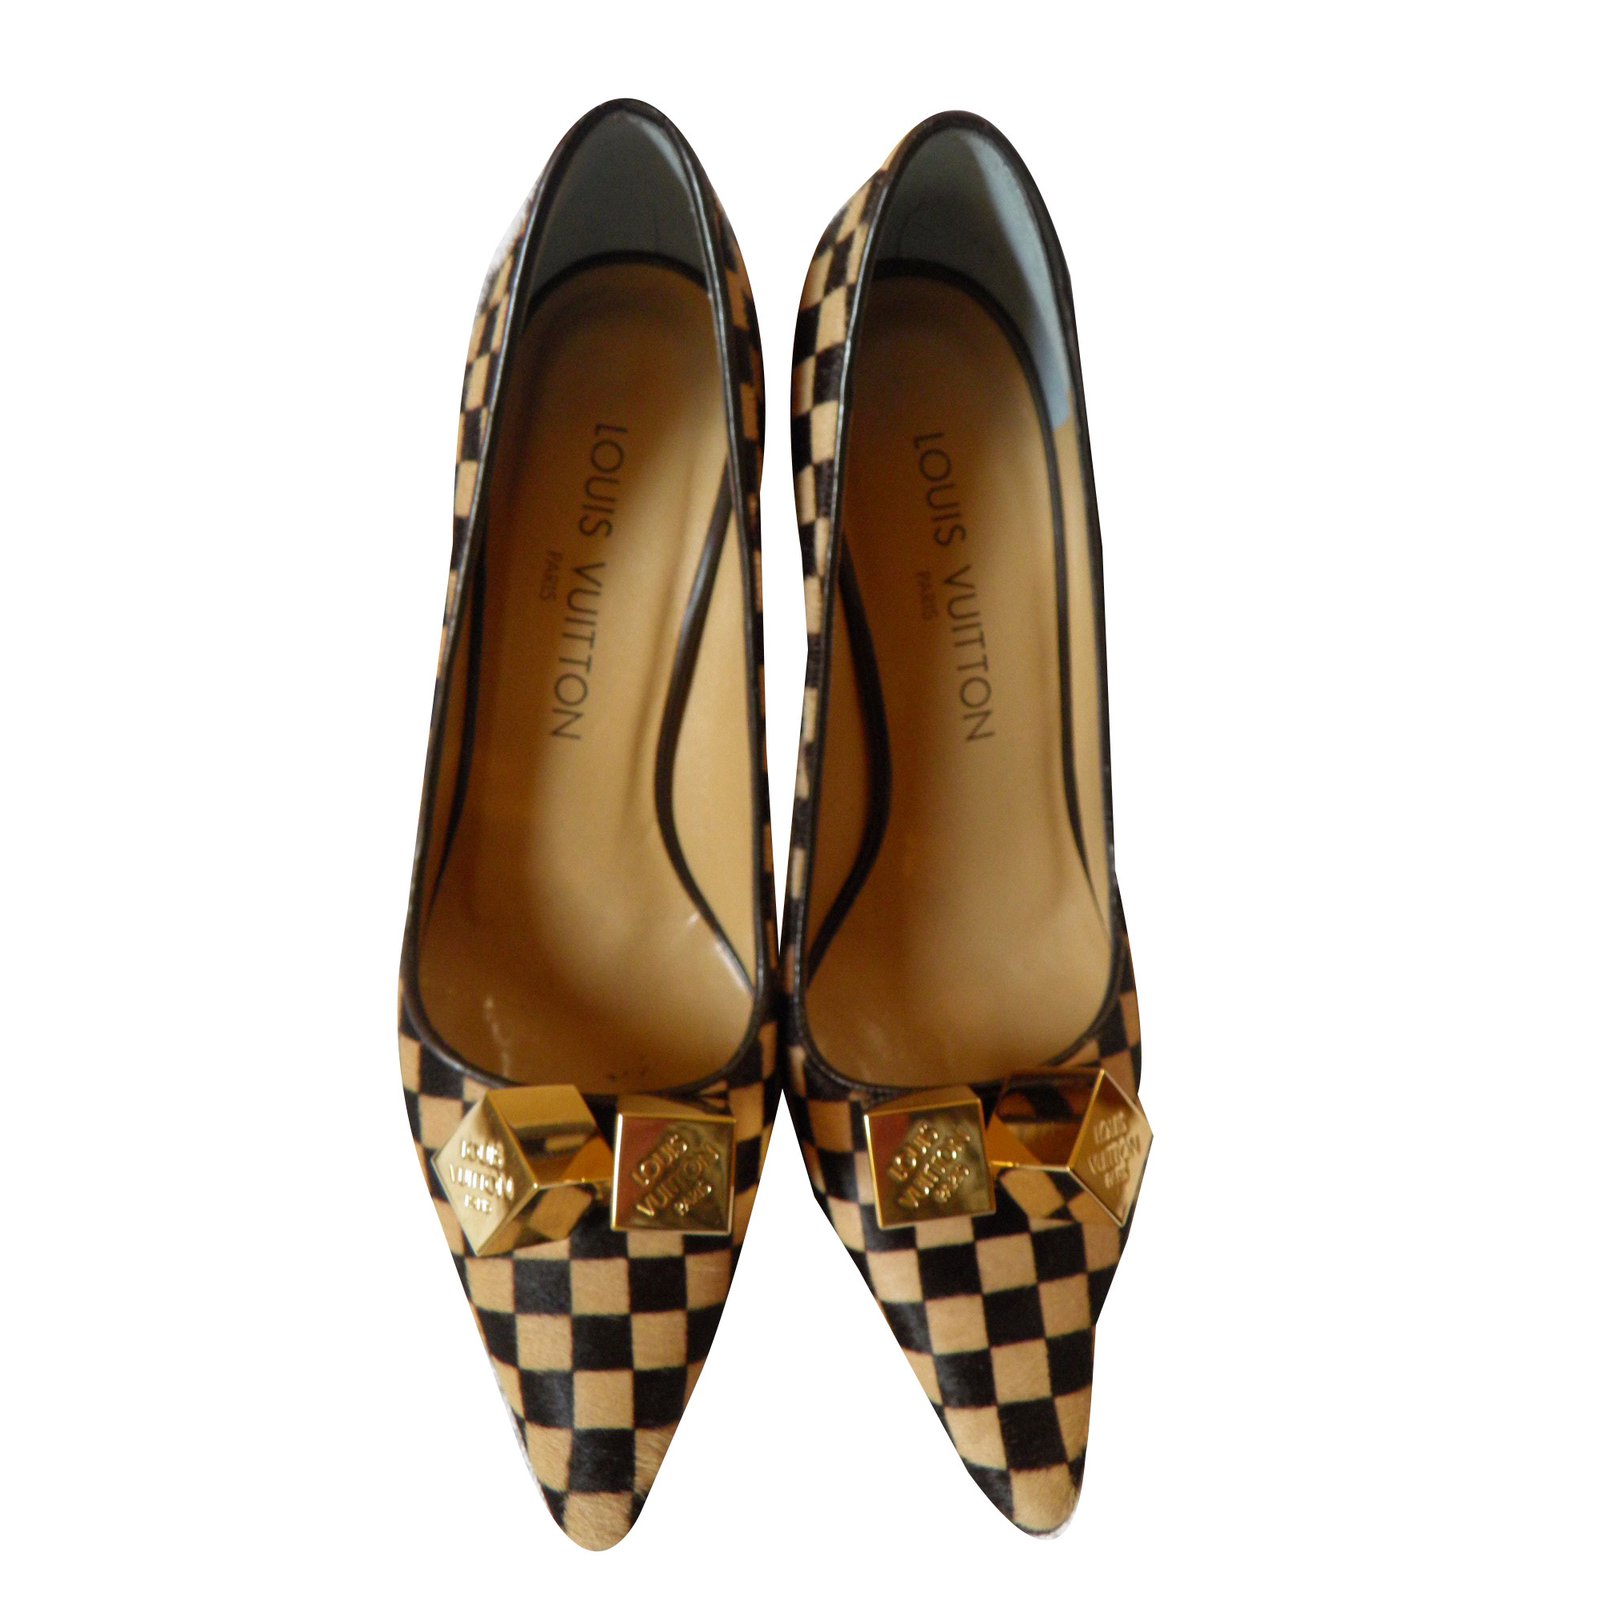 Chaussures Louis Vuitton Femme Luxe Occasion